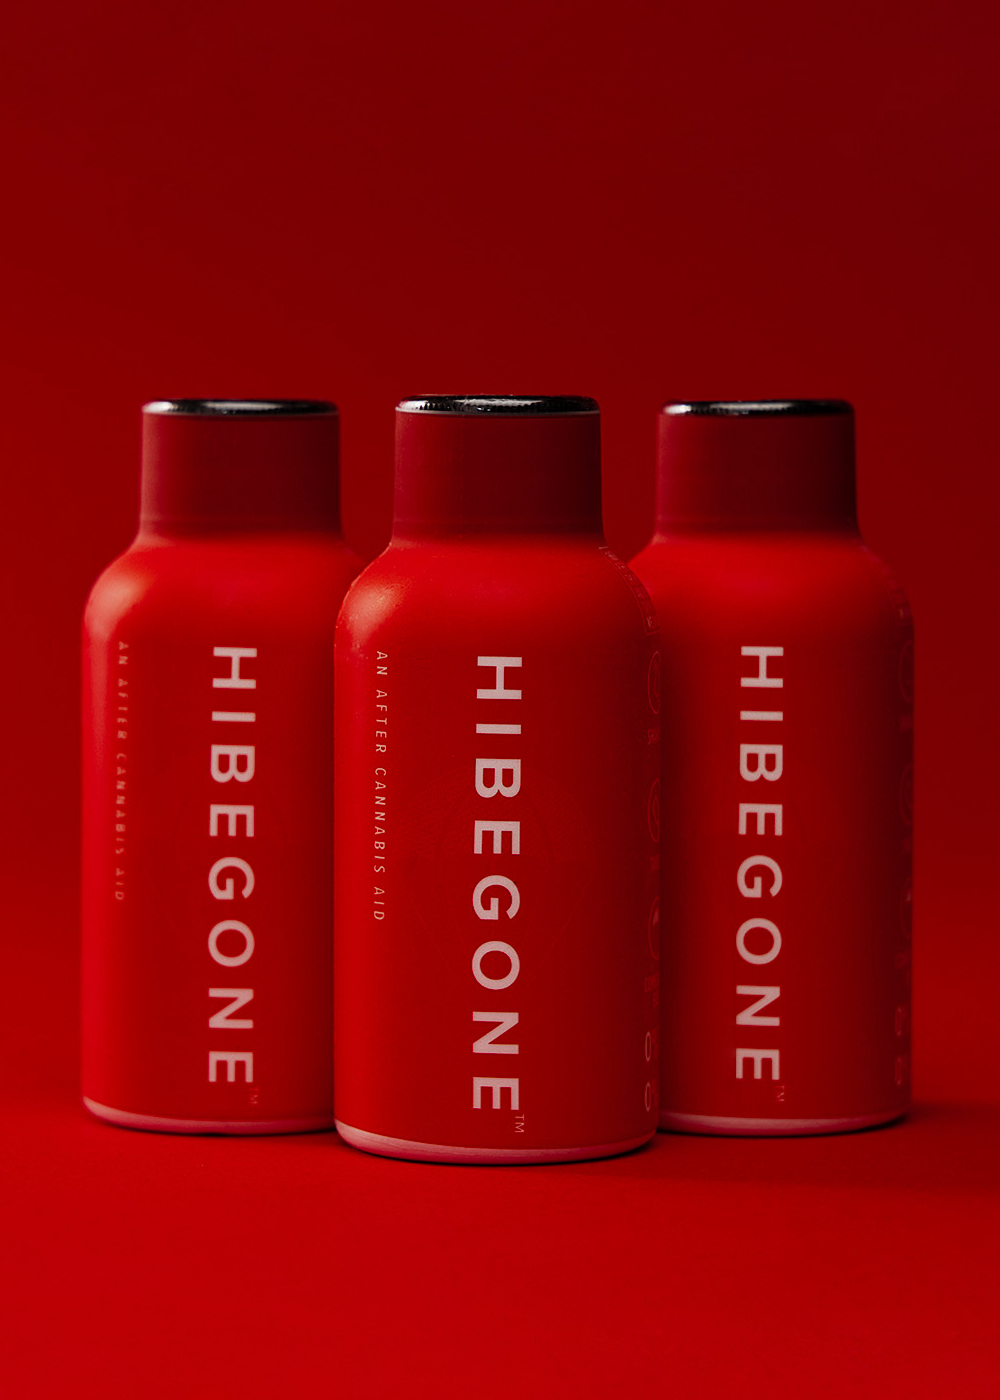 A product picture of 3 HIBEGONE bottles standing next to each other.